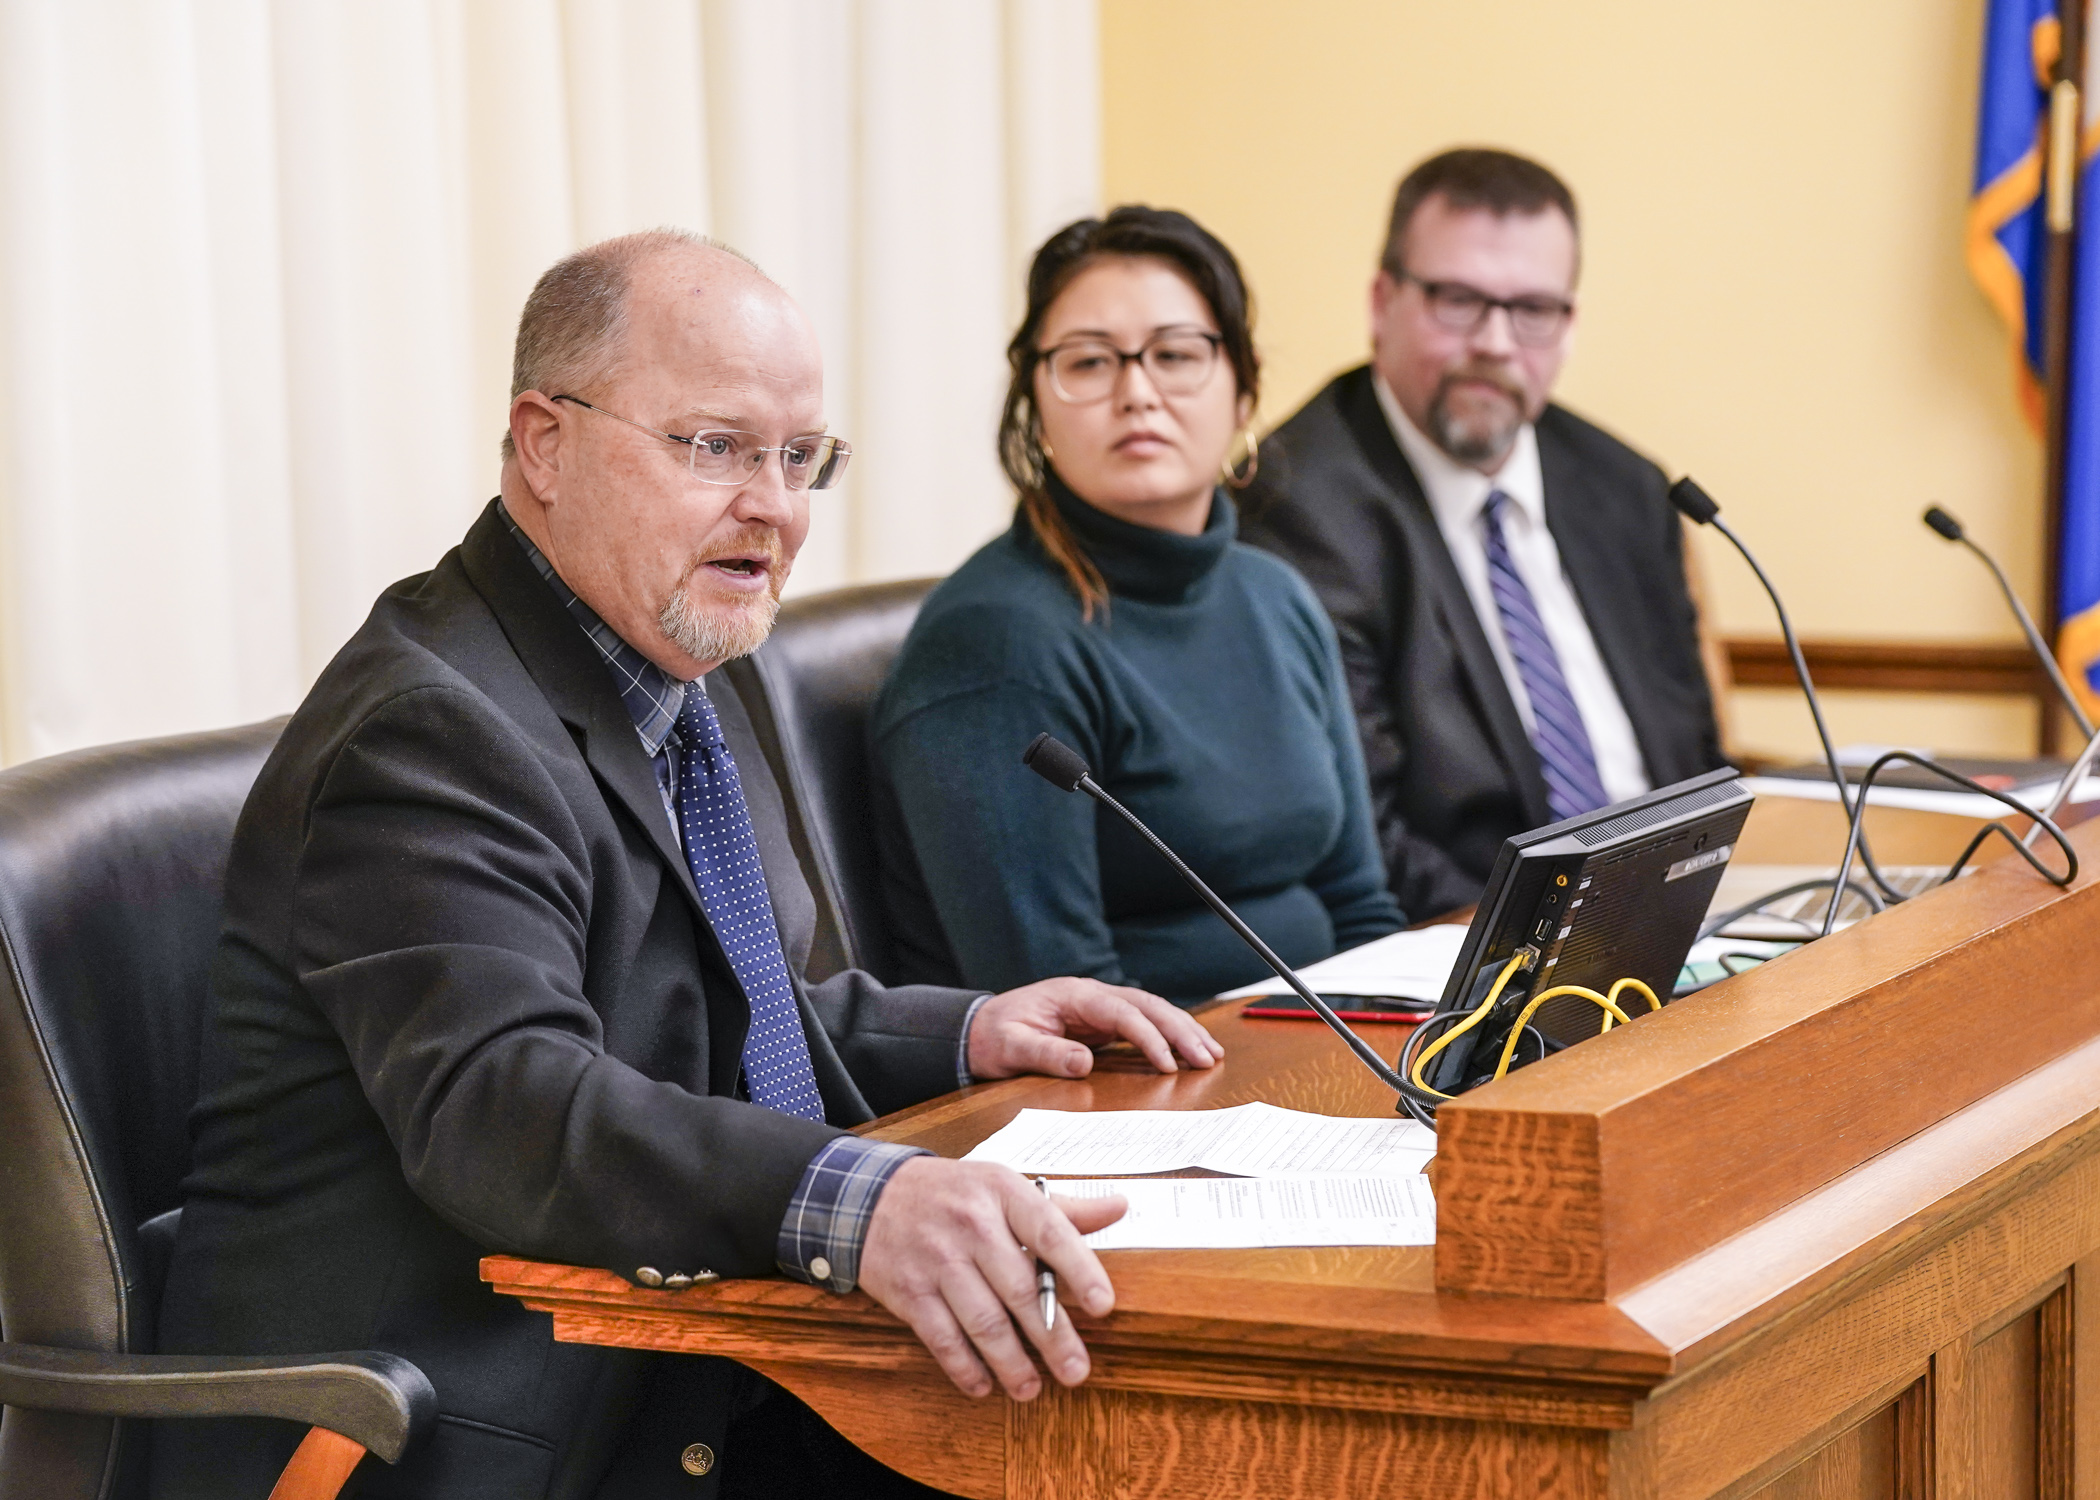 Zumbrota-Mazeppa Schools Superintendent Mike Harvey testifies Feb. 9 before the House Education Finance Committee in support of HF1082, which would increase the funding for career and technical education programs. (Photo by Catherine Davis)